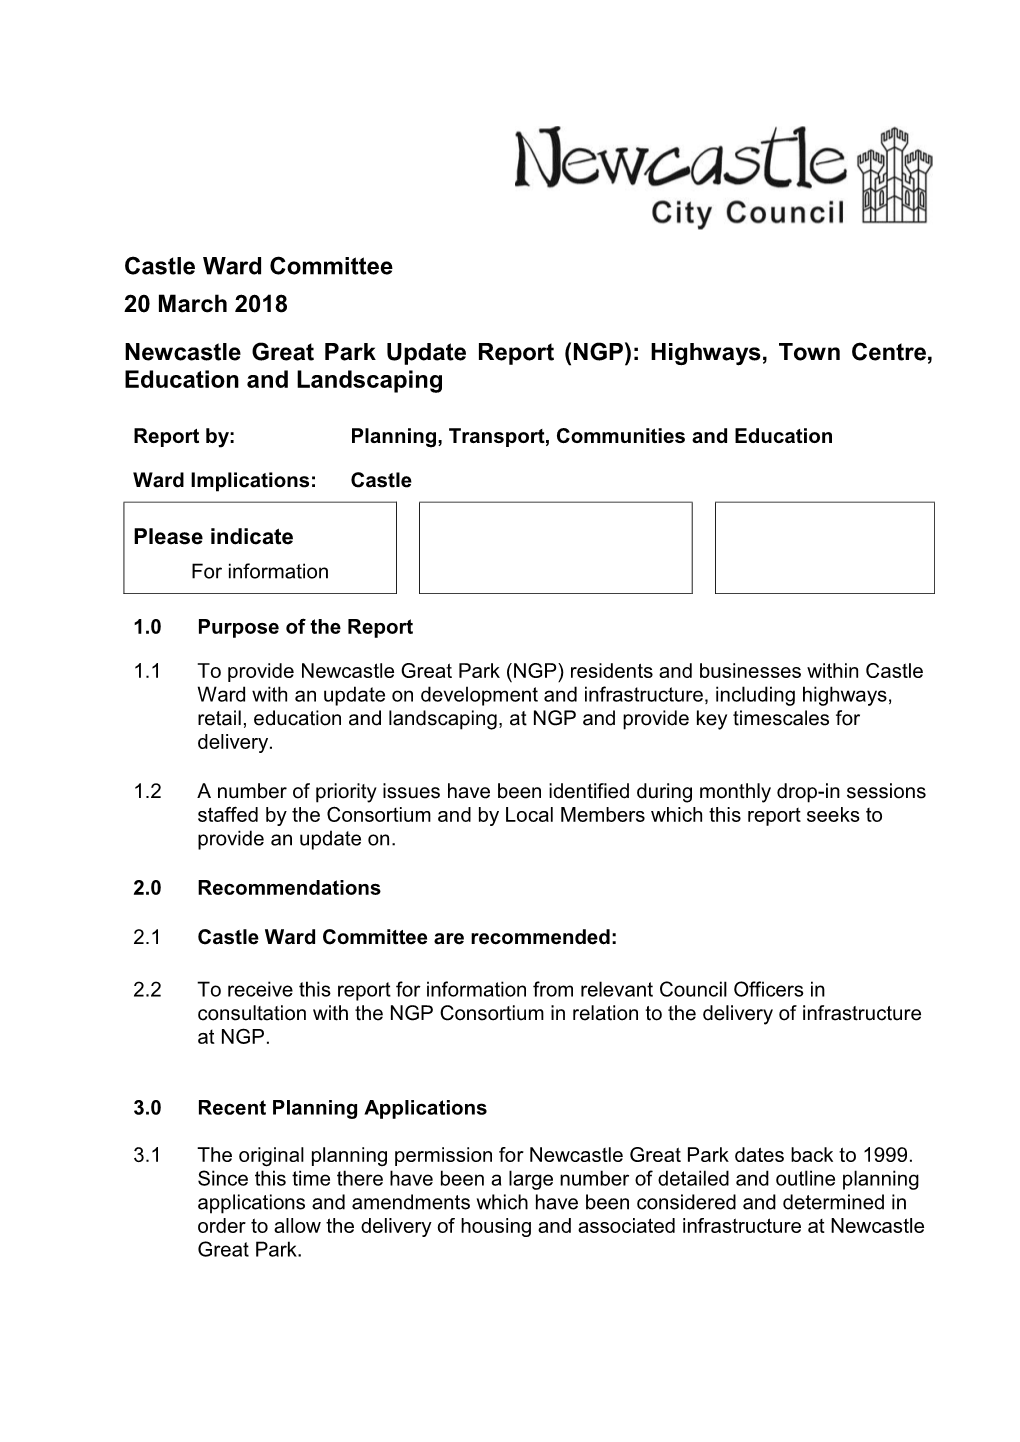 Castle Ward Committee 20 March 2018 Newcastle Great Park Update Report (NGP): Highways, Town Centre, Education and Landscaping